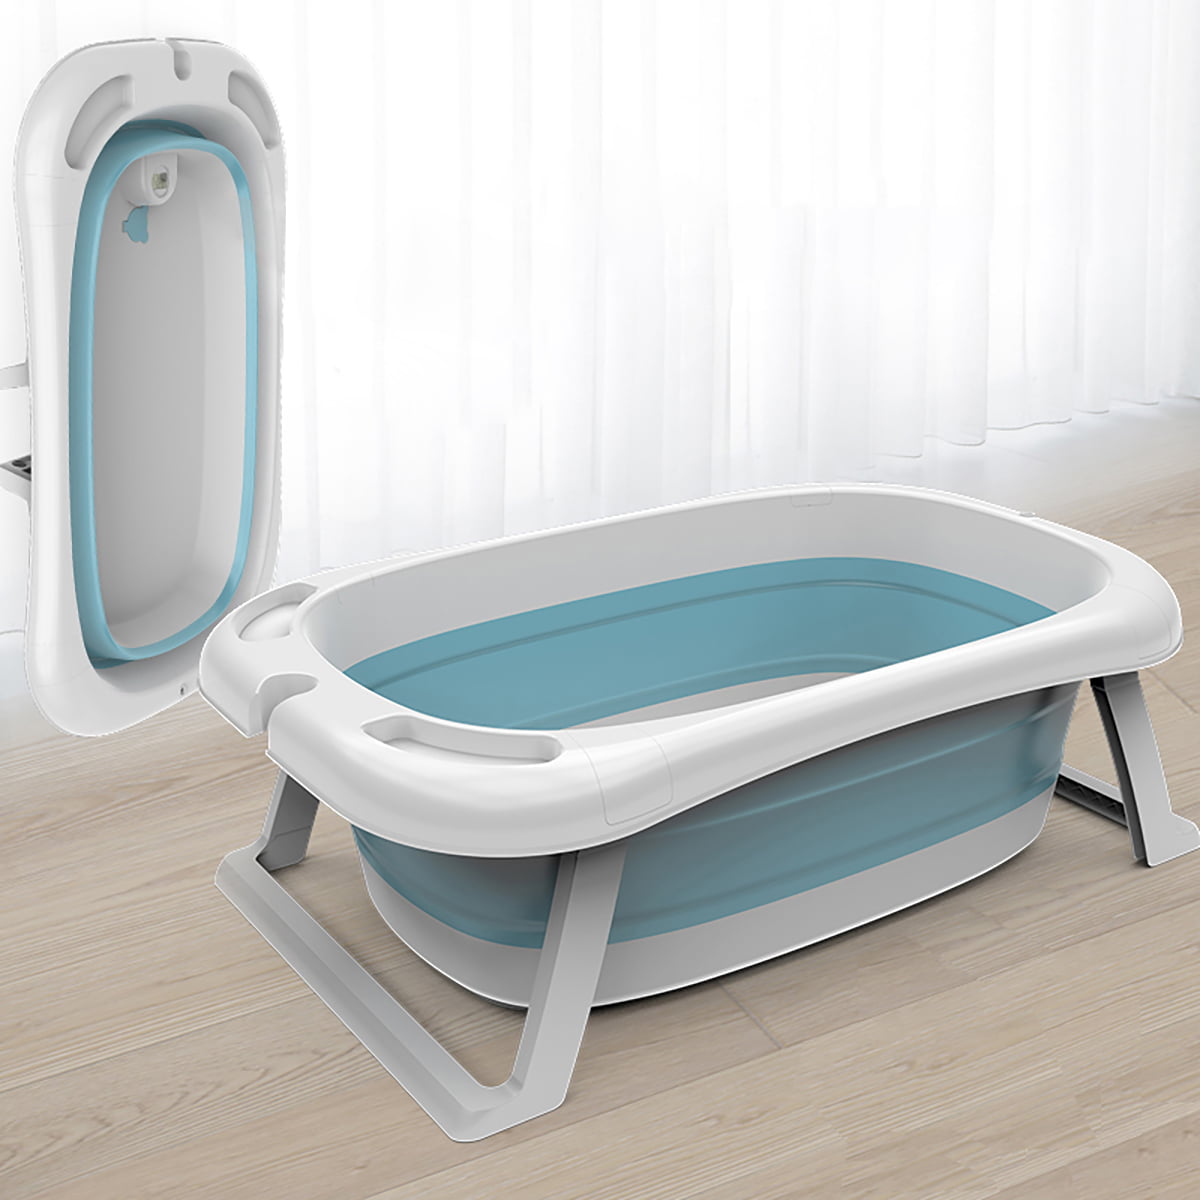 Children S Large Foldable Bathtub, Bathtubs For Big And Tall